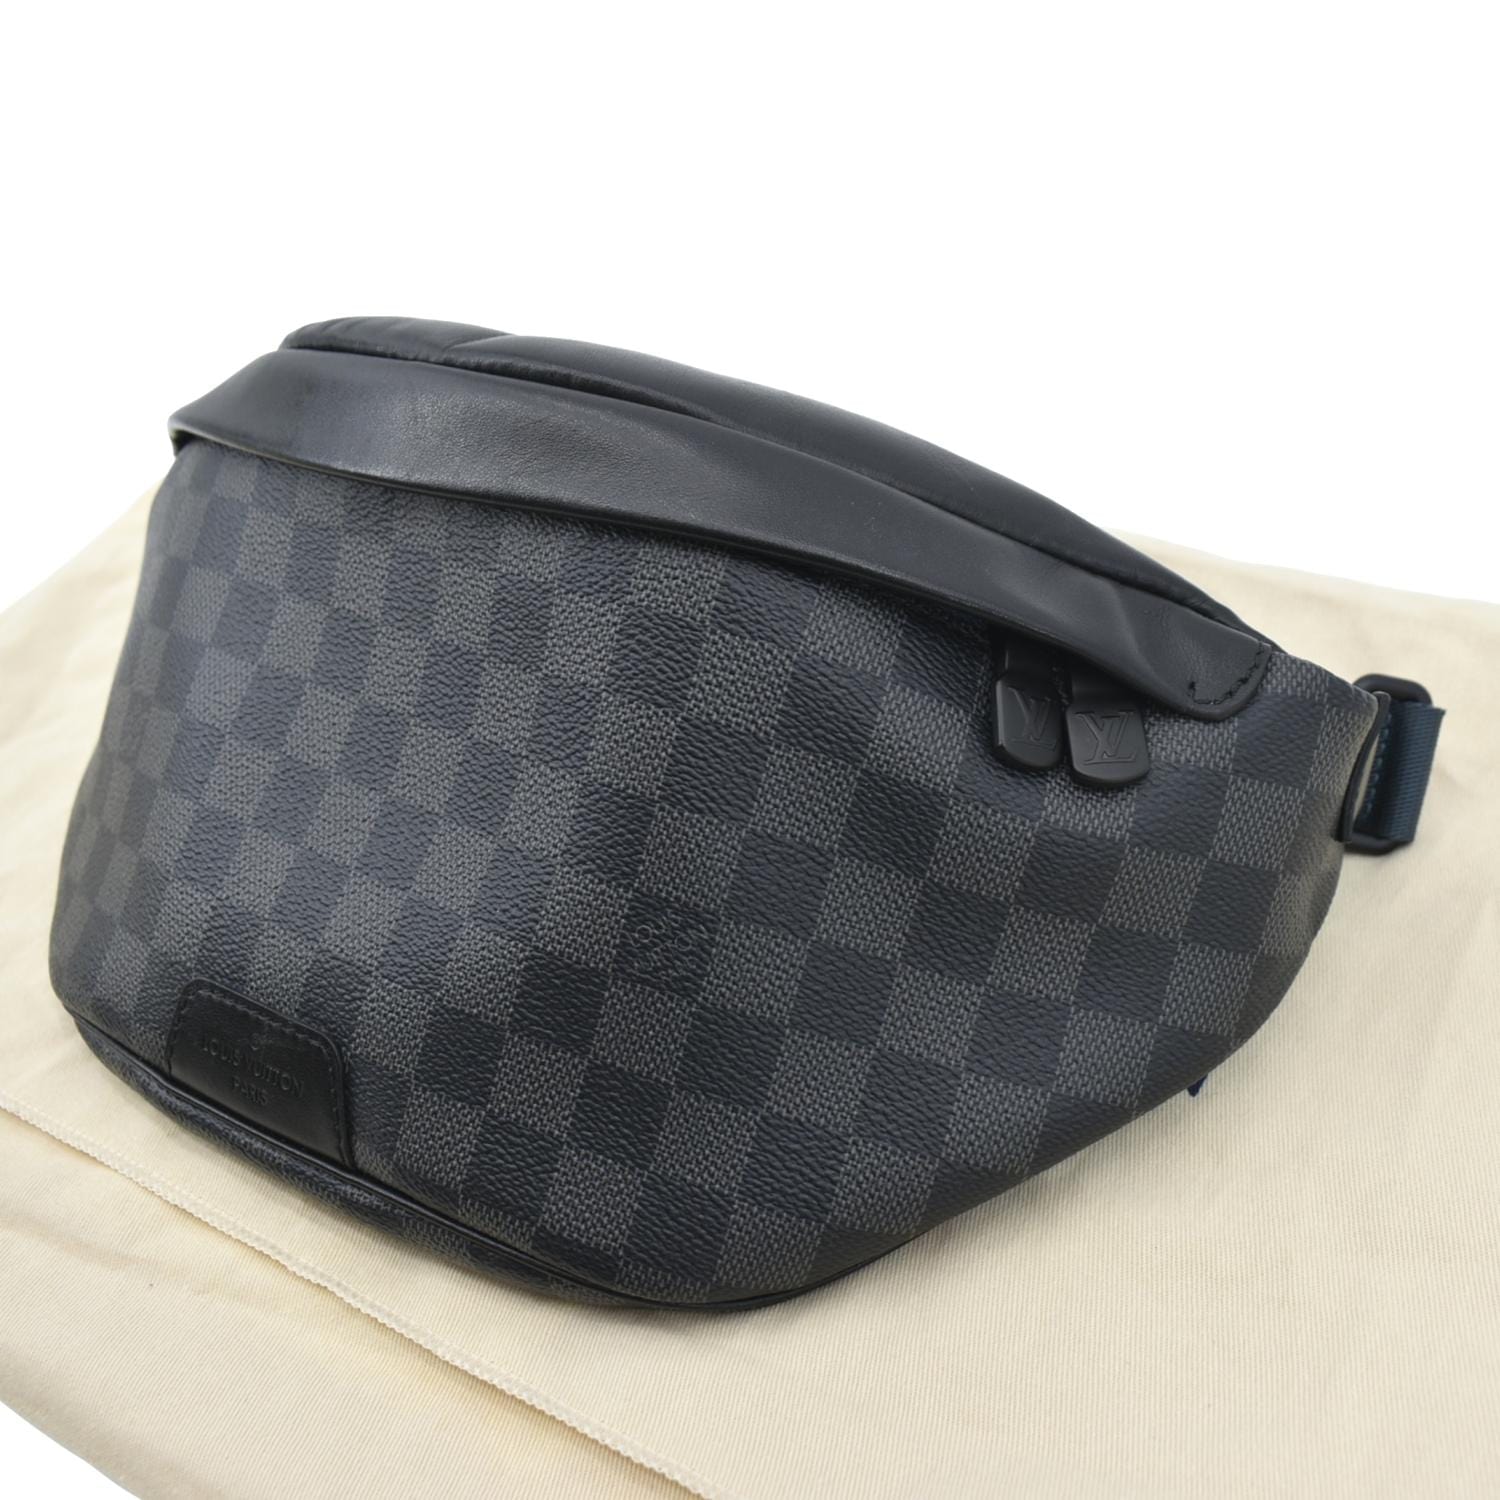 Shop Louis Vuitton Discovery bumbag (M44336) by 碧aoi